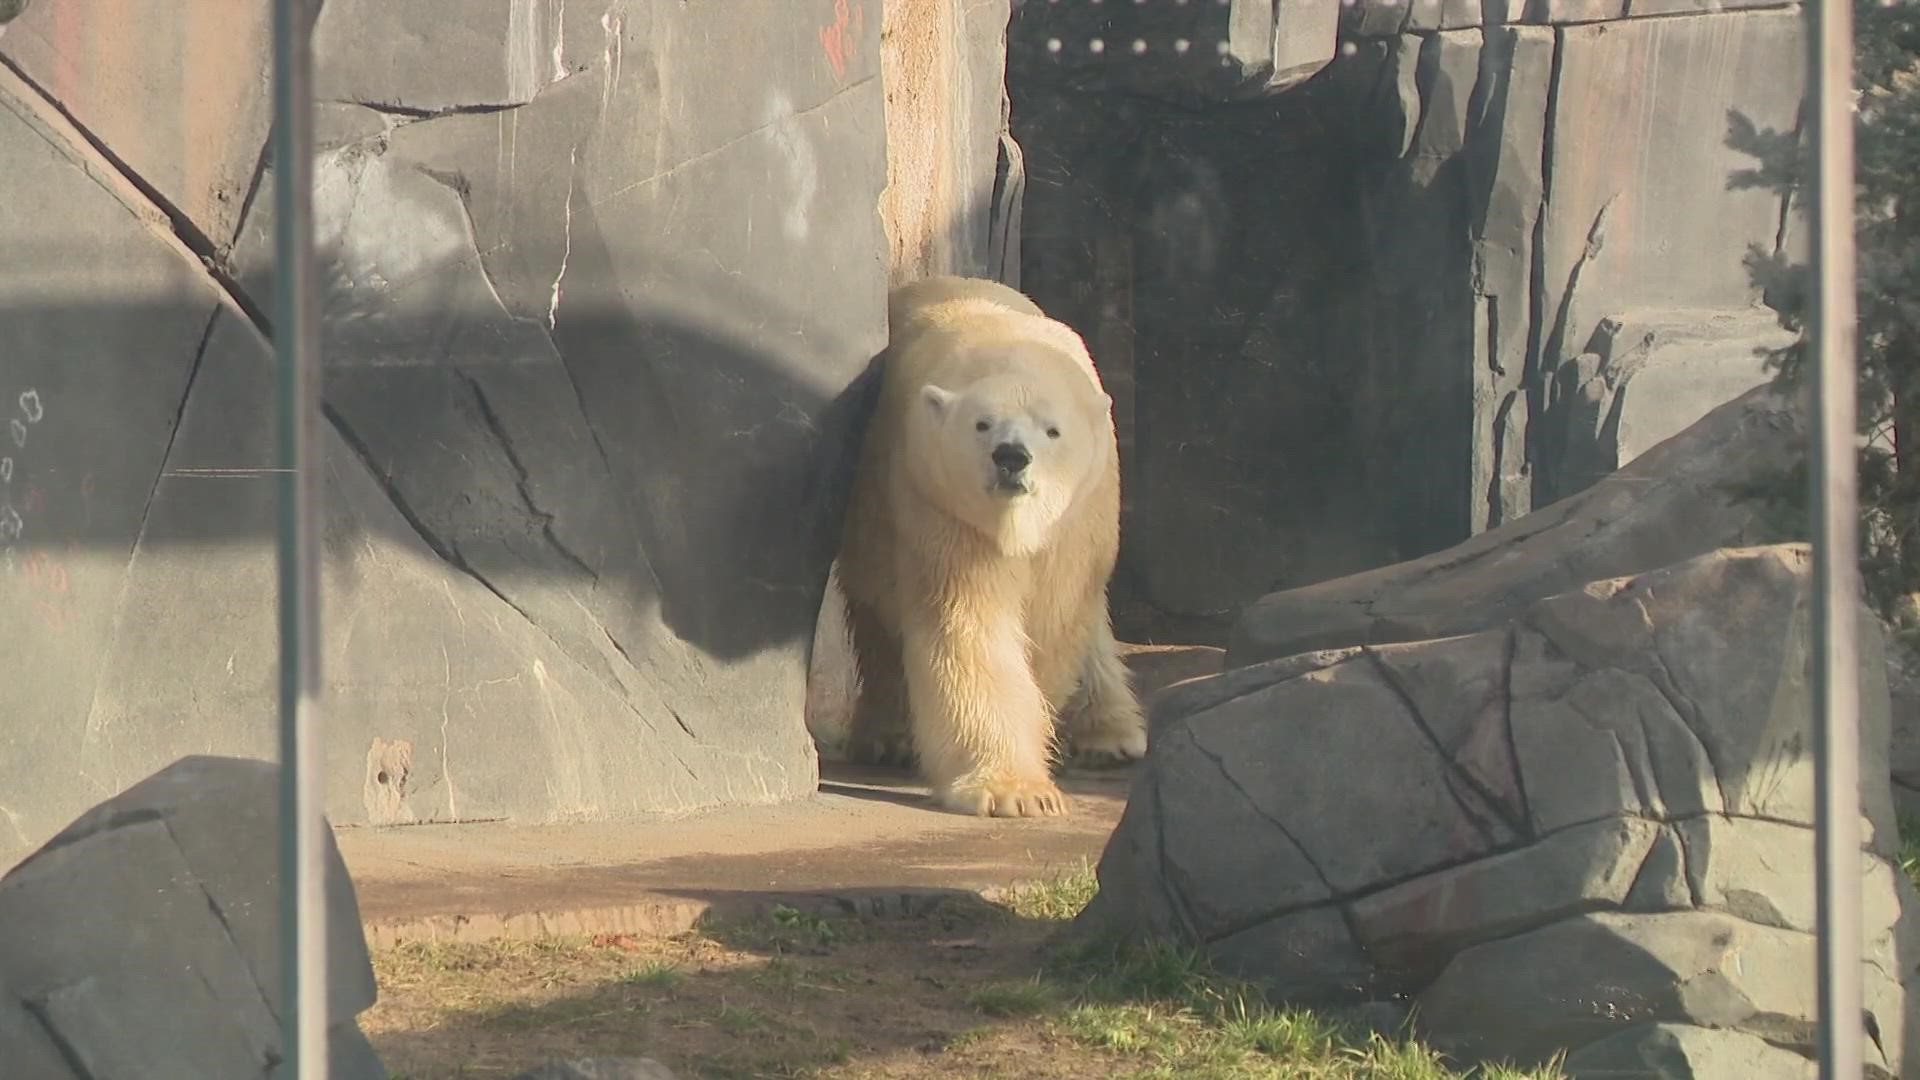 Kali's home in the Saint Louis Zoo has been open since 2015. He is an orphaned polar bear from Alaska.